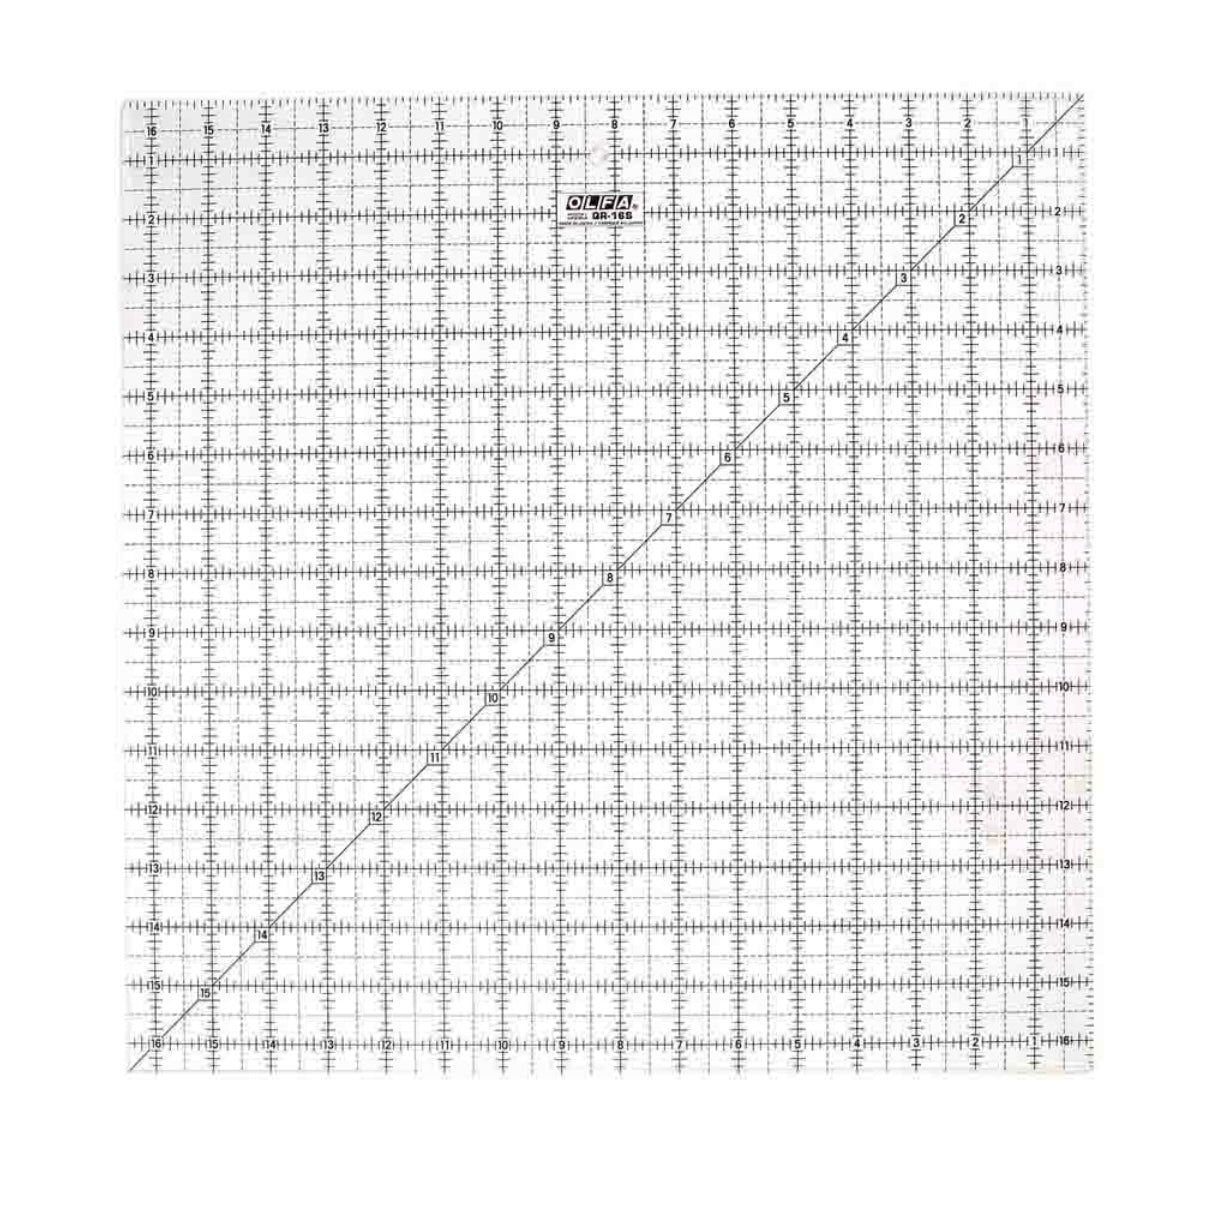 Square Frosted Acrylic Ruler - 6 1/2” x 6 1/2”